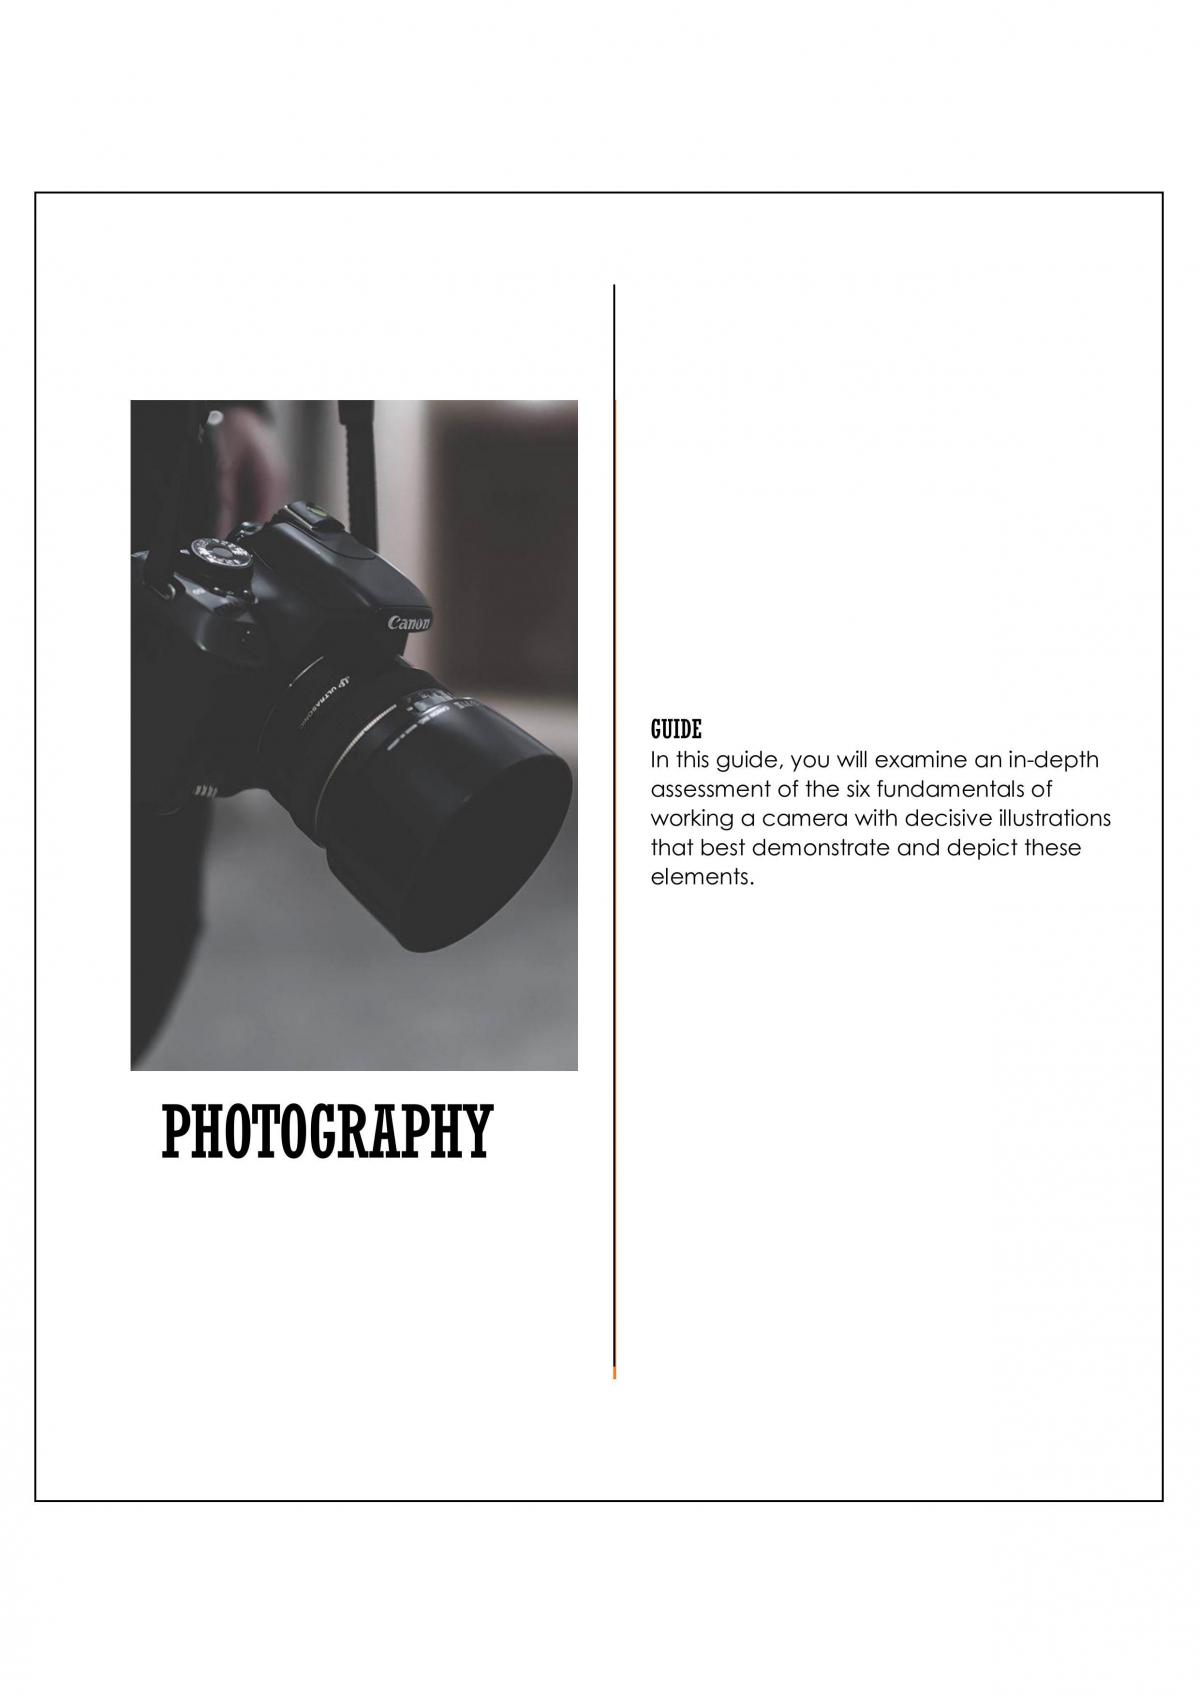 Photography (Guide) - Page 1